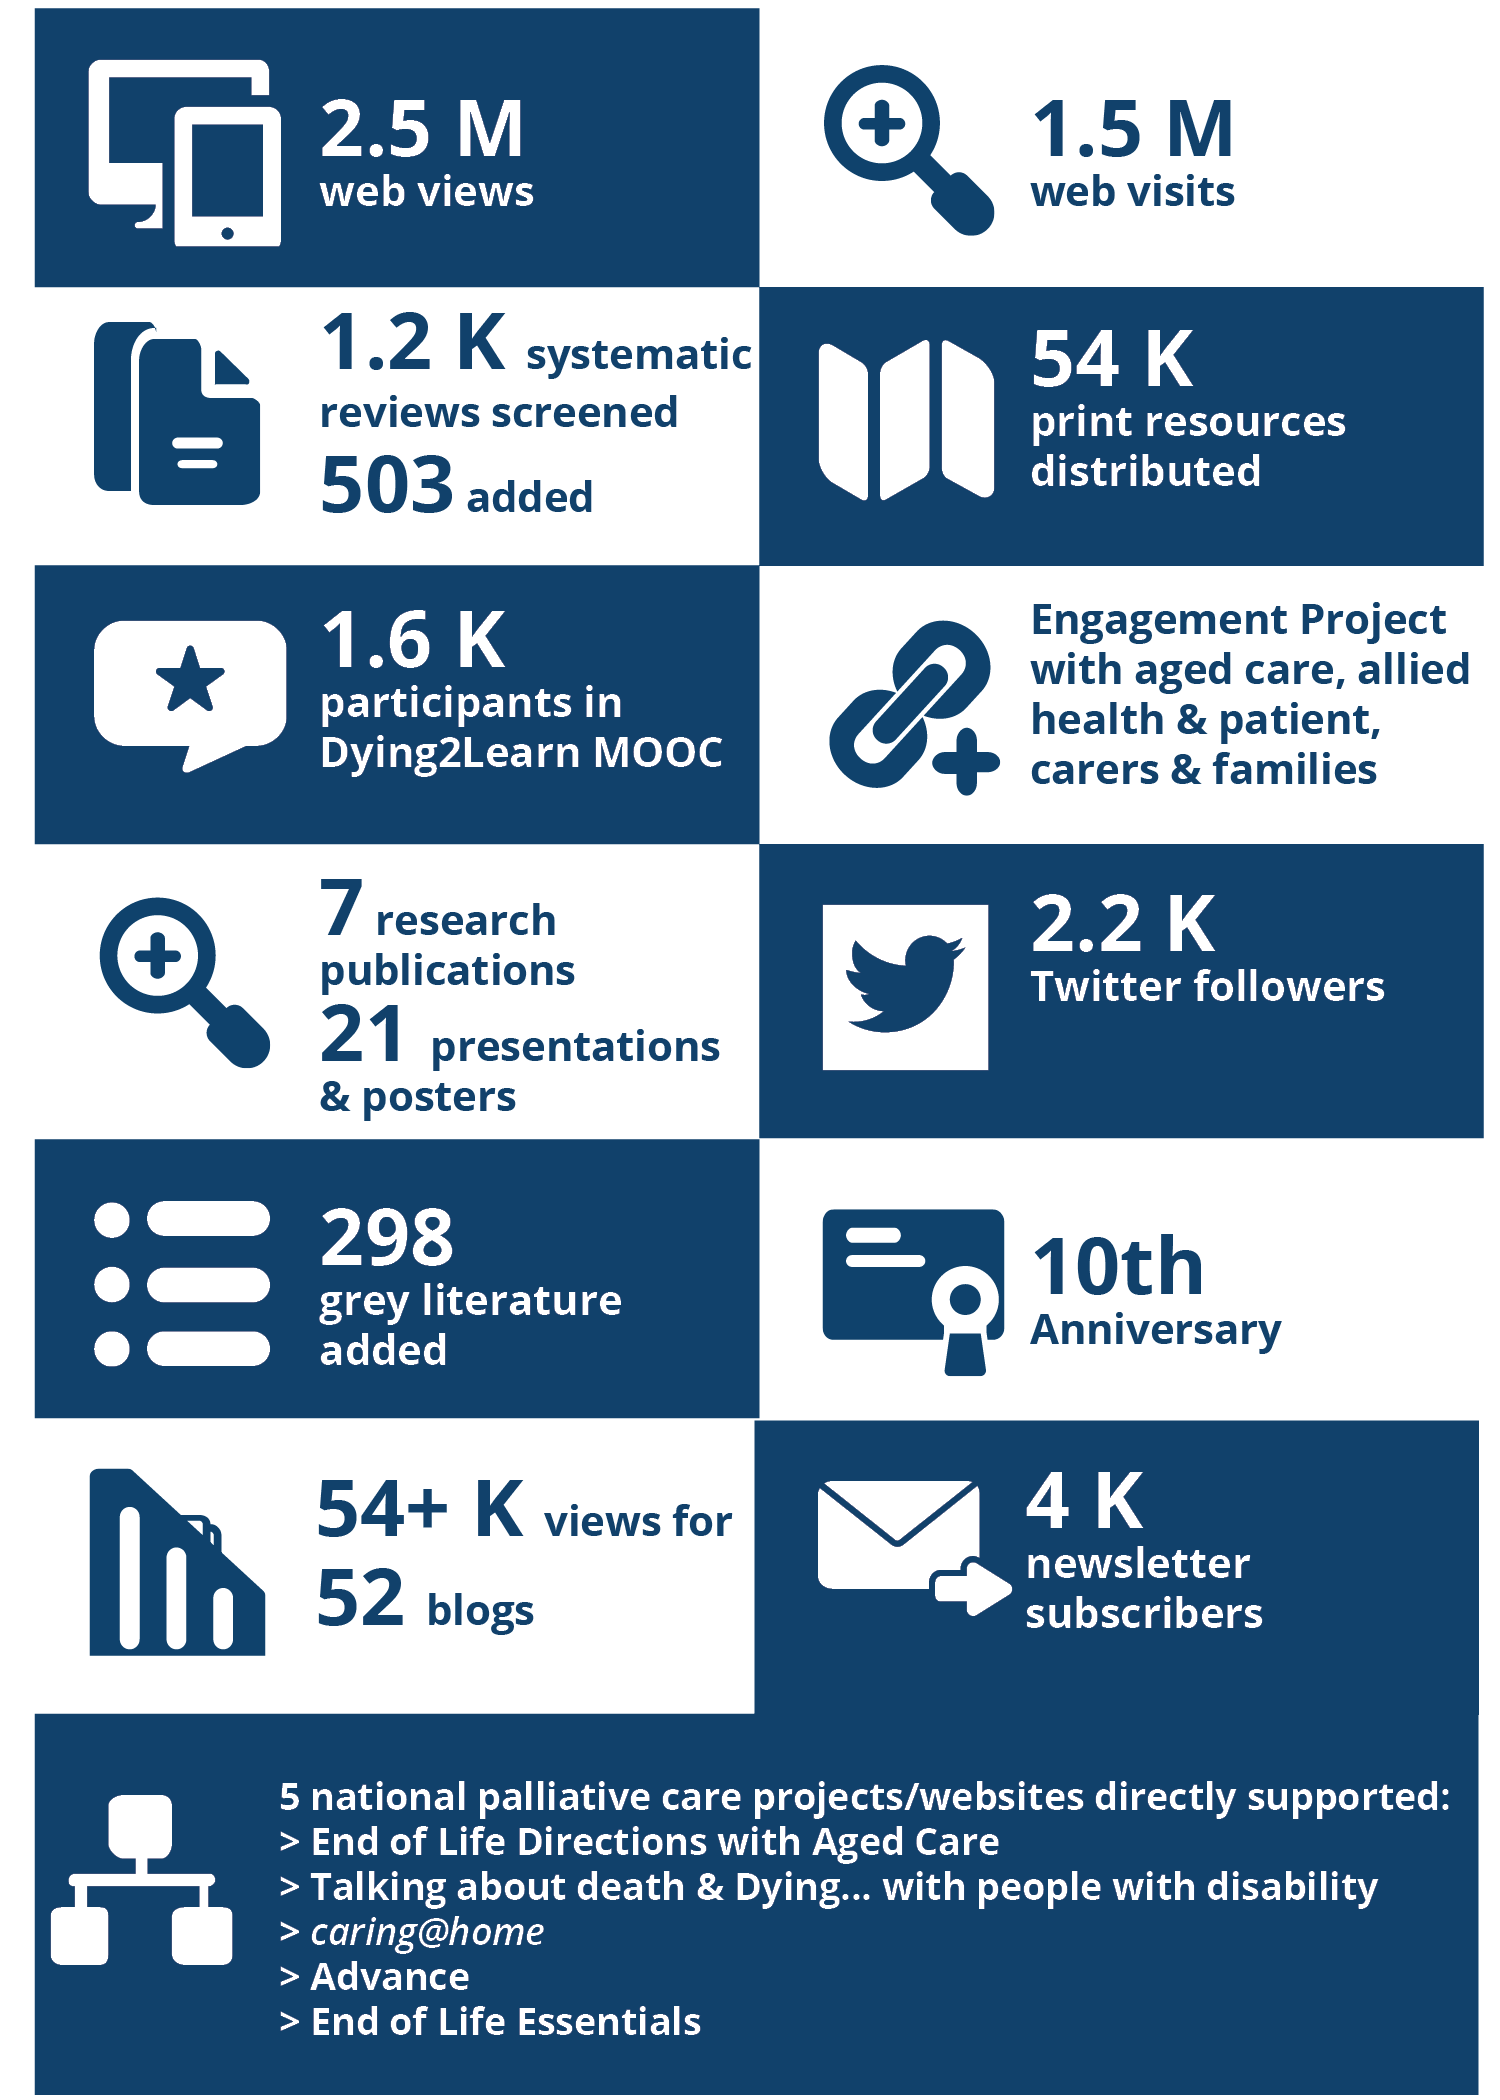 2018: A milestone year. 2.5M web views. 1.5M web visits, 1.2K systematic reviews screened 503 added, 54K print resources distributed, 1.6K participants in Dying2Learn MOOC, Engagement Project with aged care, allied health & patient, carers & families, 7 research publications 21 presentations & posters, 2.2K Twitter followers, 298 grey literature added, 10th anniversary, 52K views for 48 blogs, 4K newsletter subscribers, 5 national palliative care projects/websites directly supported; End of Life Directions with Aged Care; Talking aobut death & Dying... with people with a disability, caring@home; Advance; End of Life Essentials.